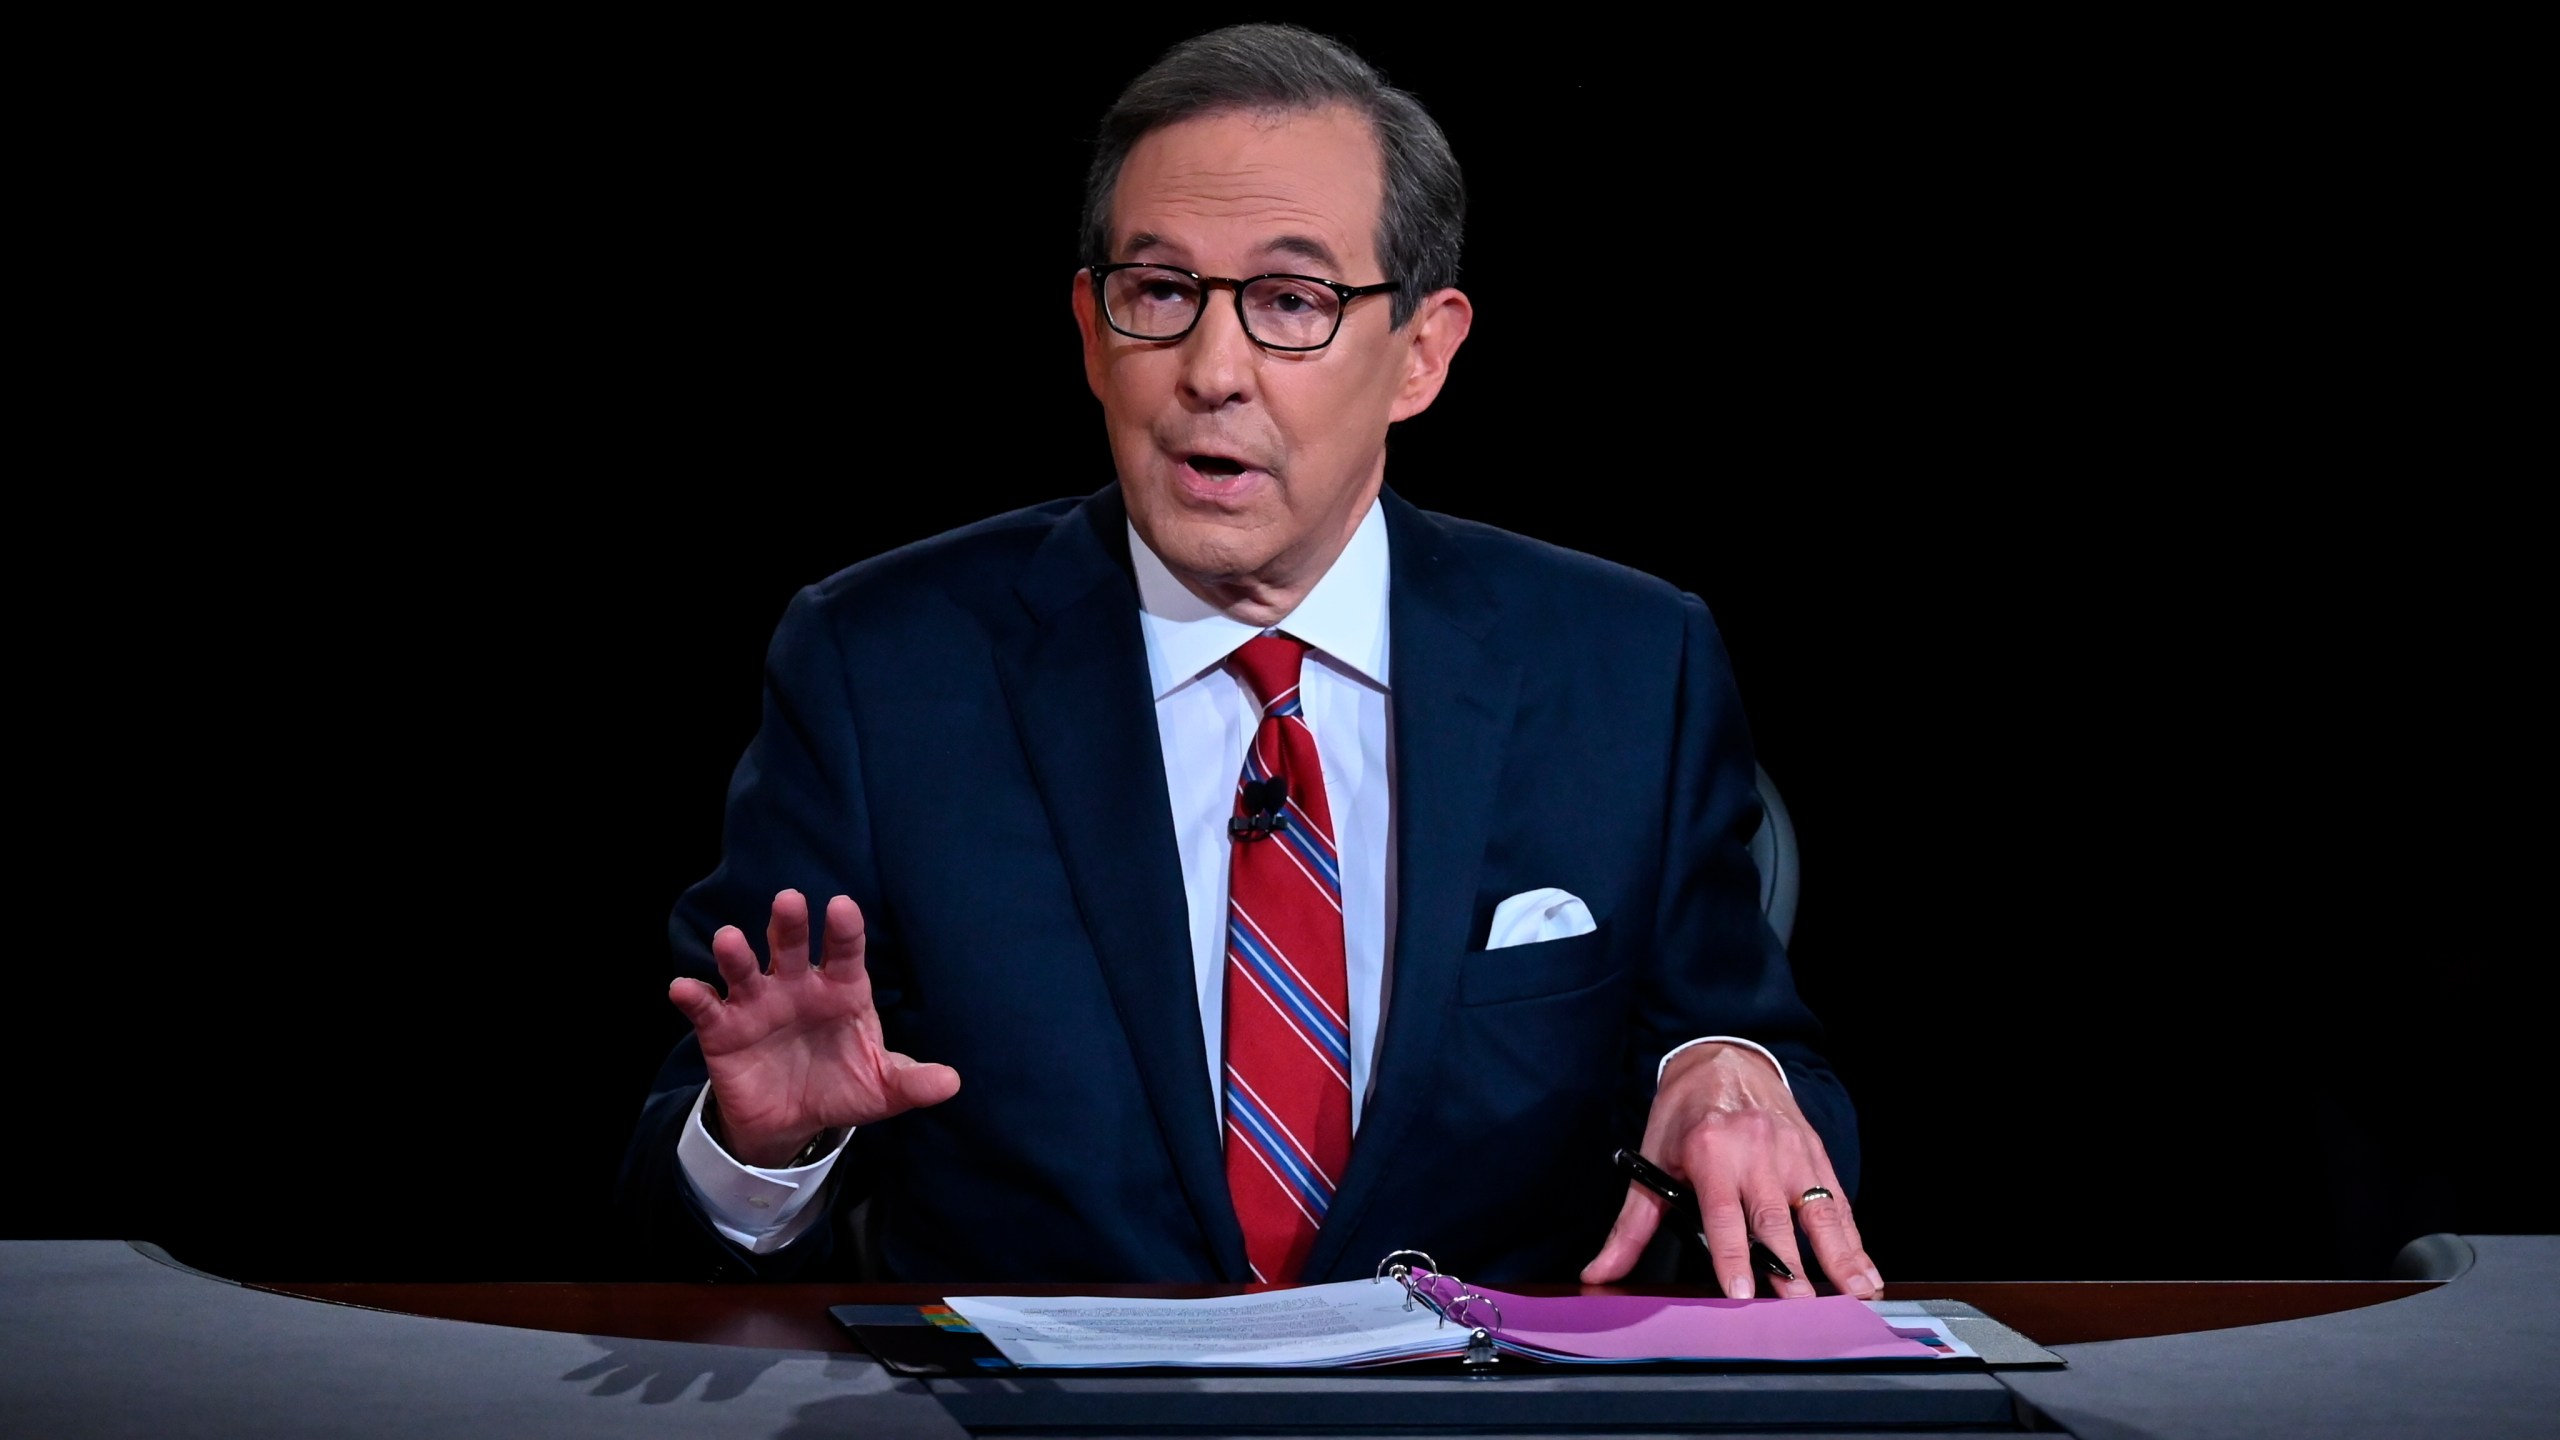 FILE - Moderator Chris Wallace speaks as President Donald Trump and Democratic presidential candidate former Vice President Joe Biden participate in the first presidential debate in Cleveland on Sept. 29, 2020. Wallace has written a book on the race between John F. Kennedy and Richard Nixon. The race was narrowly won by Kennedy and featured the first televised presidential debates. Dutton announced Wednesday that “Countdown 1960: The Behind-the-Scenes Story of the 311 Days that Changed America’s Politics Forever” will be published Oct. 8. (Olivier Douliery/Pool via AP, File)